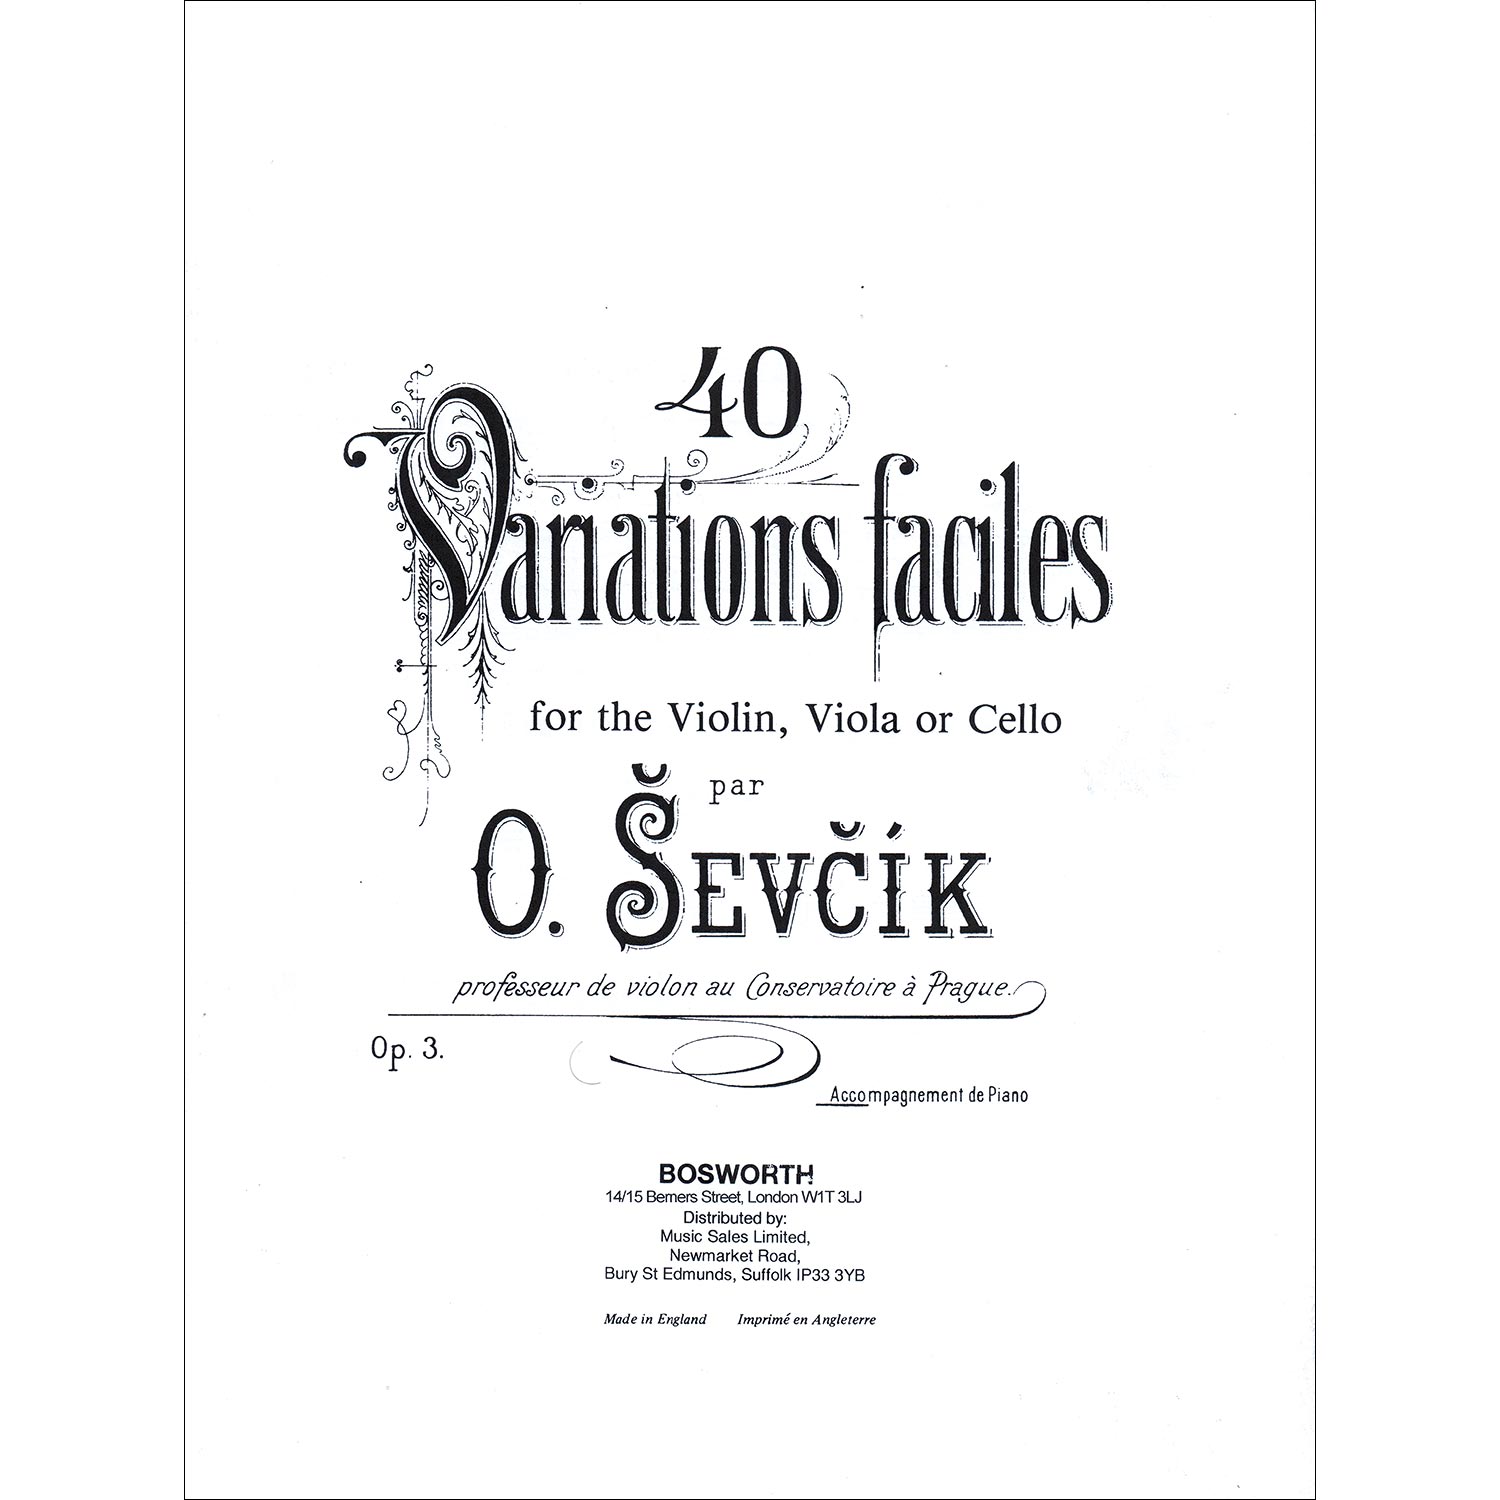 Install belt Ambient Forty Variations, Op. 3, piano accompaniment for violin, viola or cello;  Otakar Sevcik (Bosworth) | Johnson String Instrument